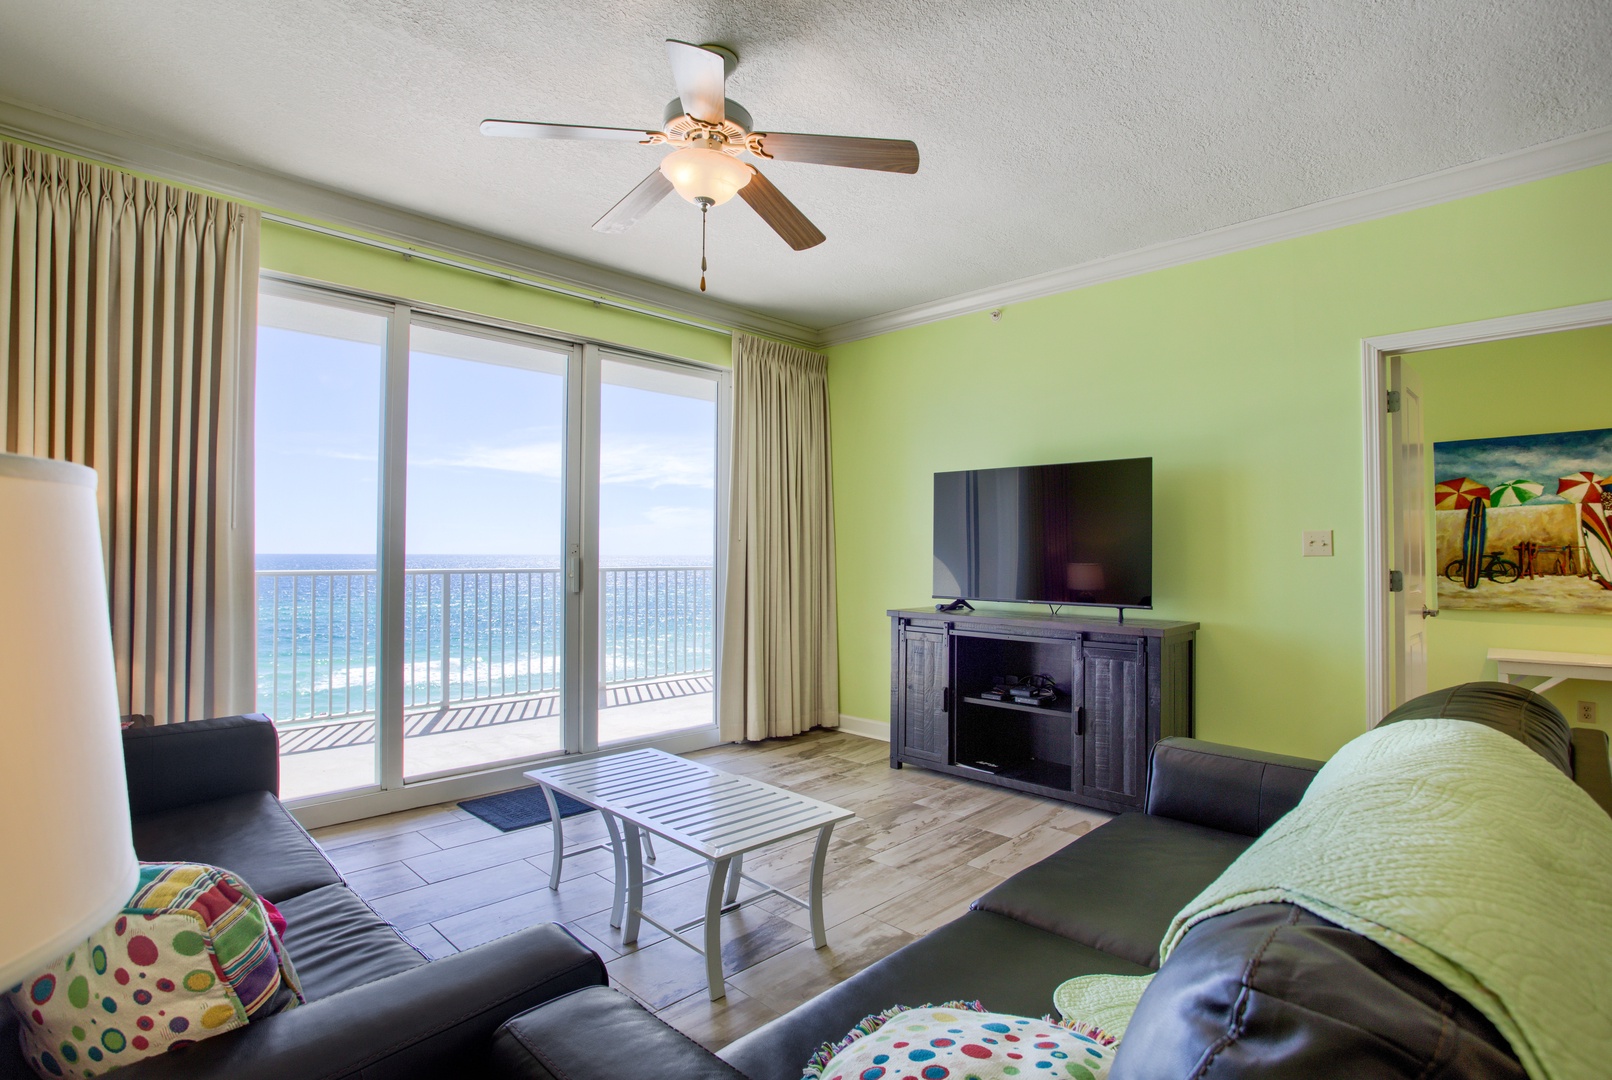 Enjoy your favorite streaming entertainment or just soak in the incredible Beach Views